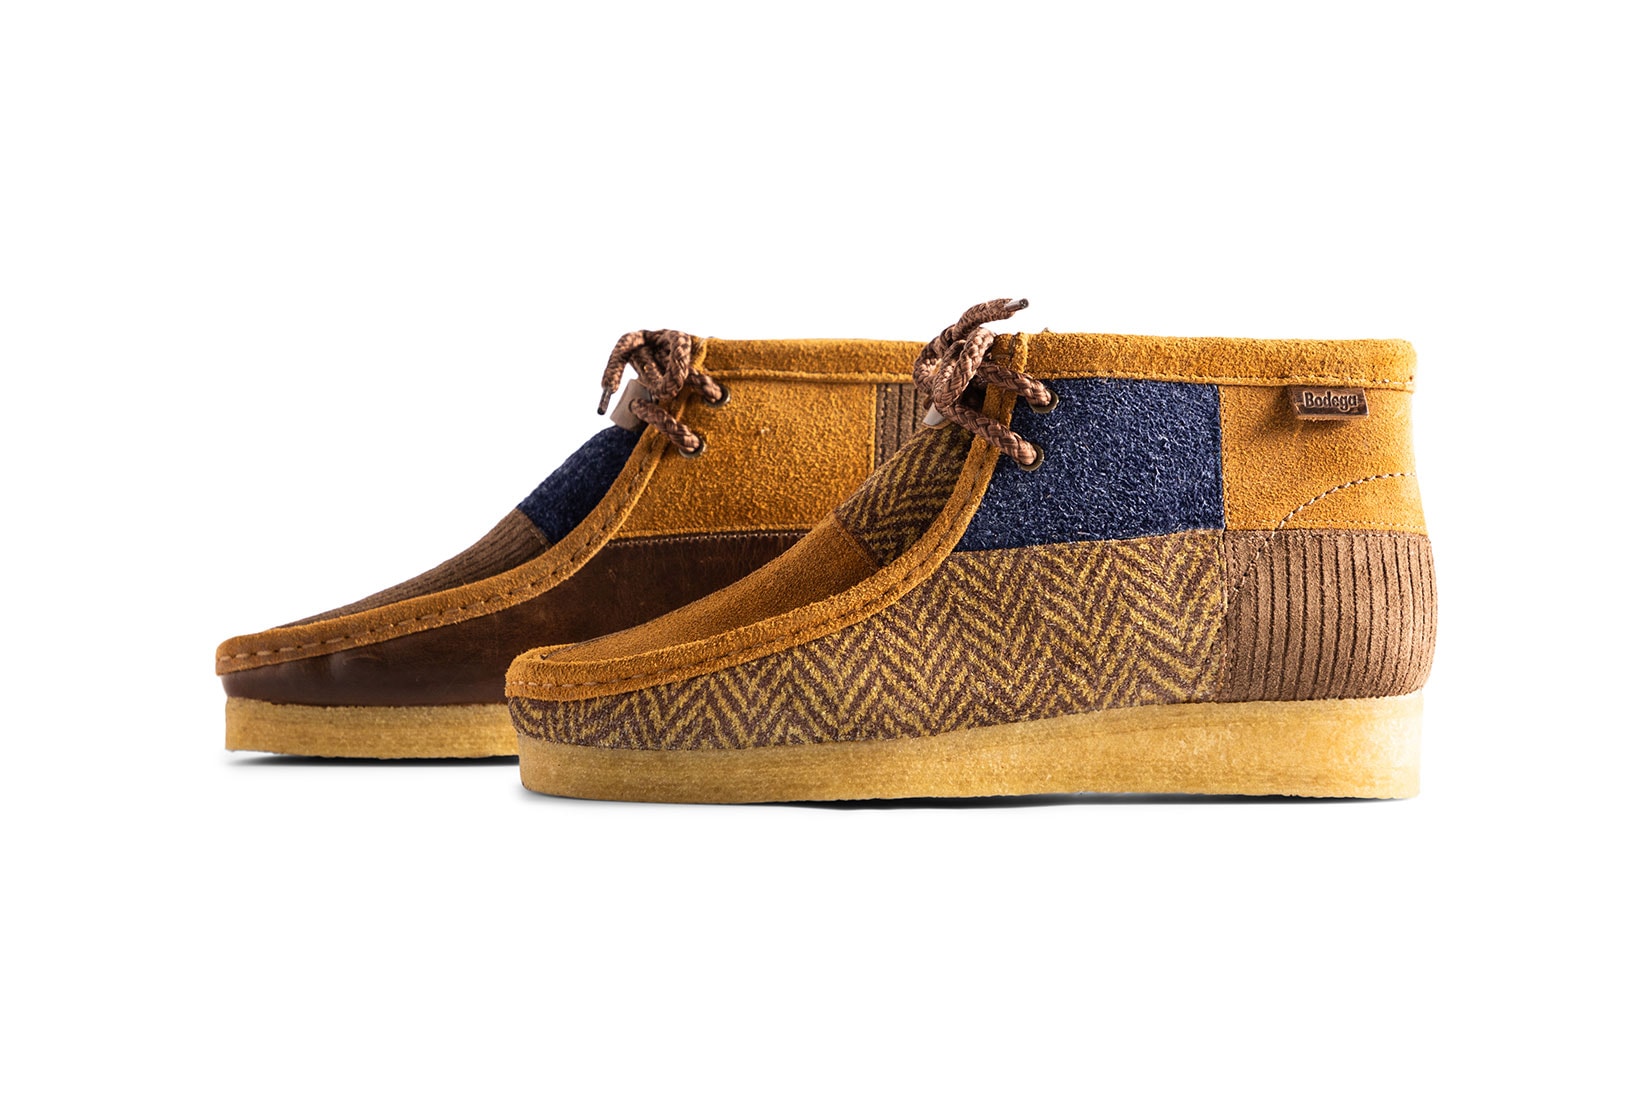 Bodega Clarks Wallabee 2.0 "Heritage Patchwork" Collaboration Images Release Date